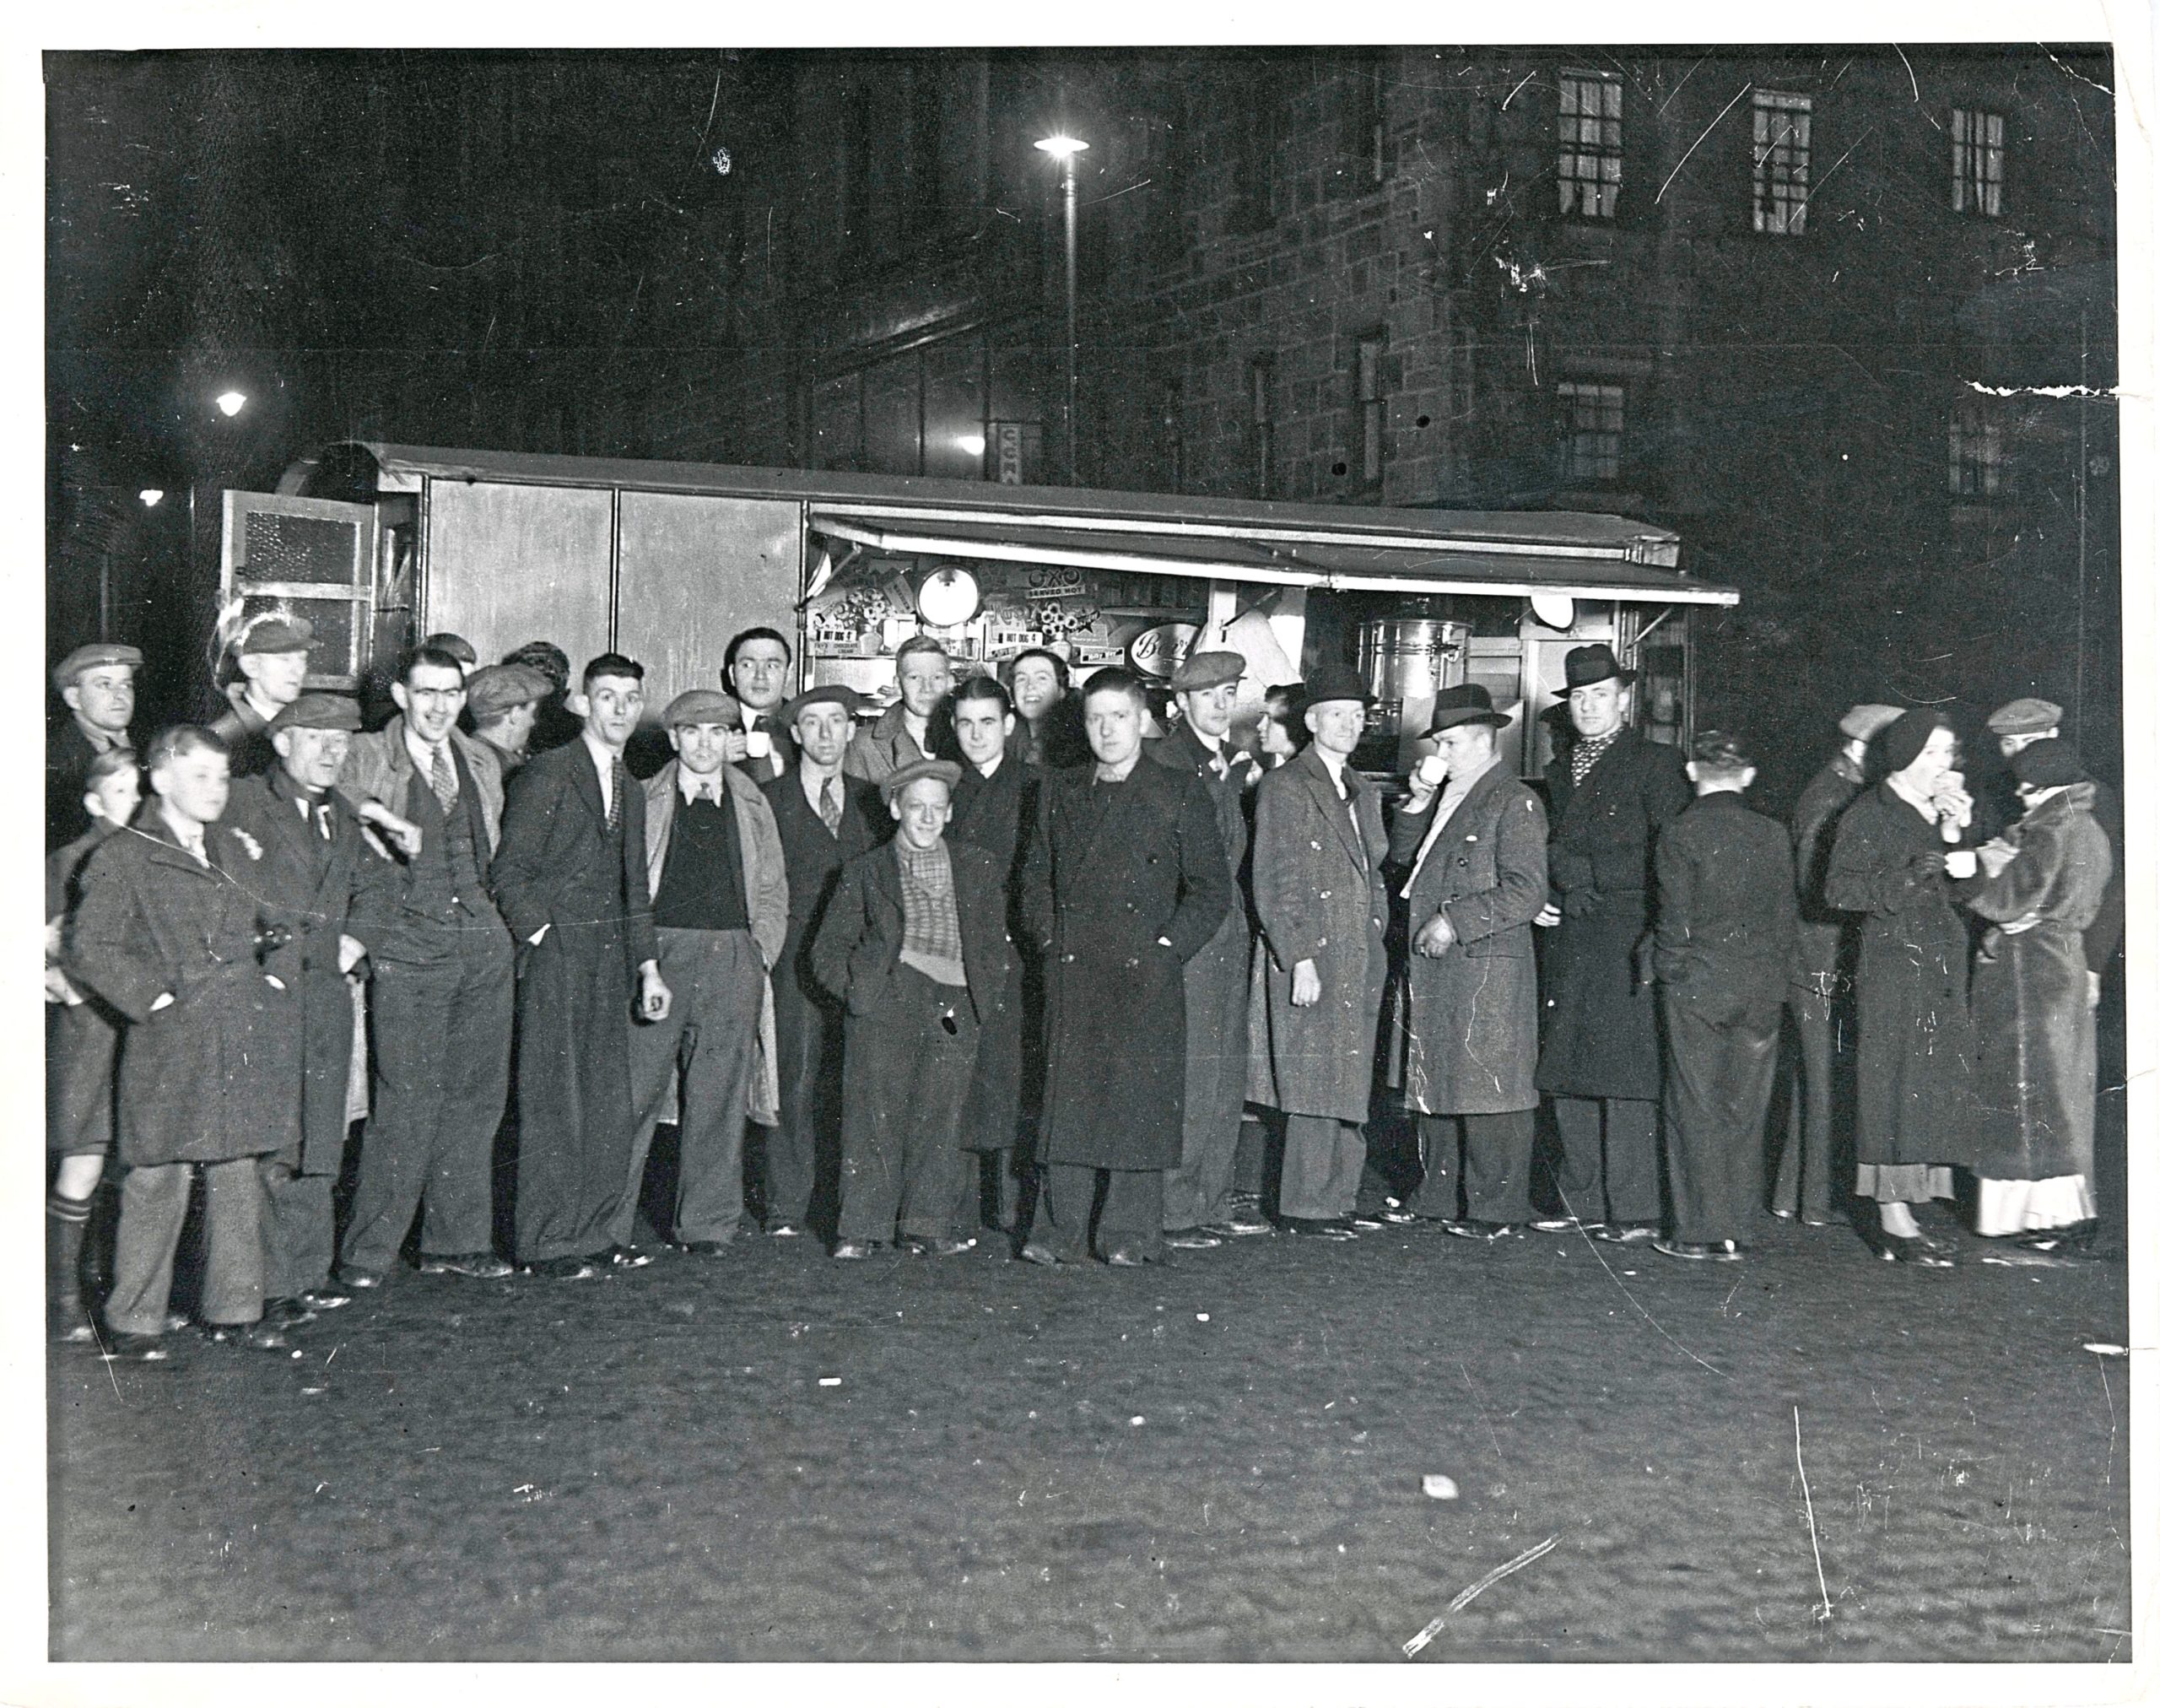 Shift workers and late night revellers at the coffee stall on the Castlegate in 1938.